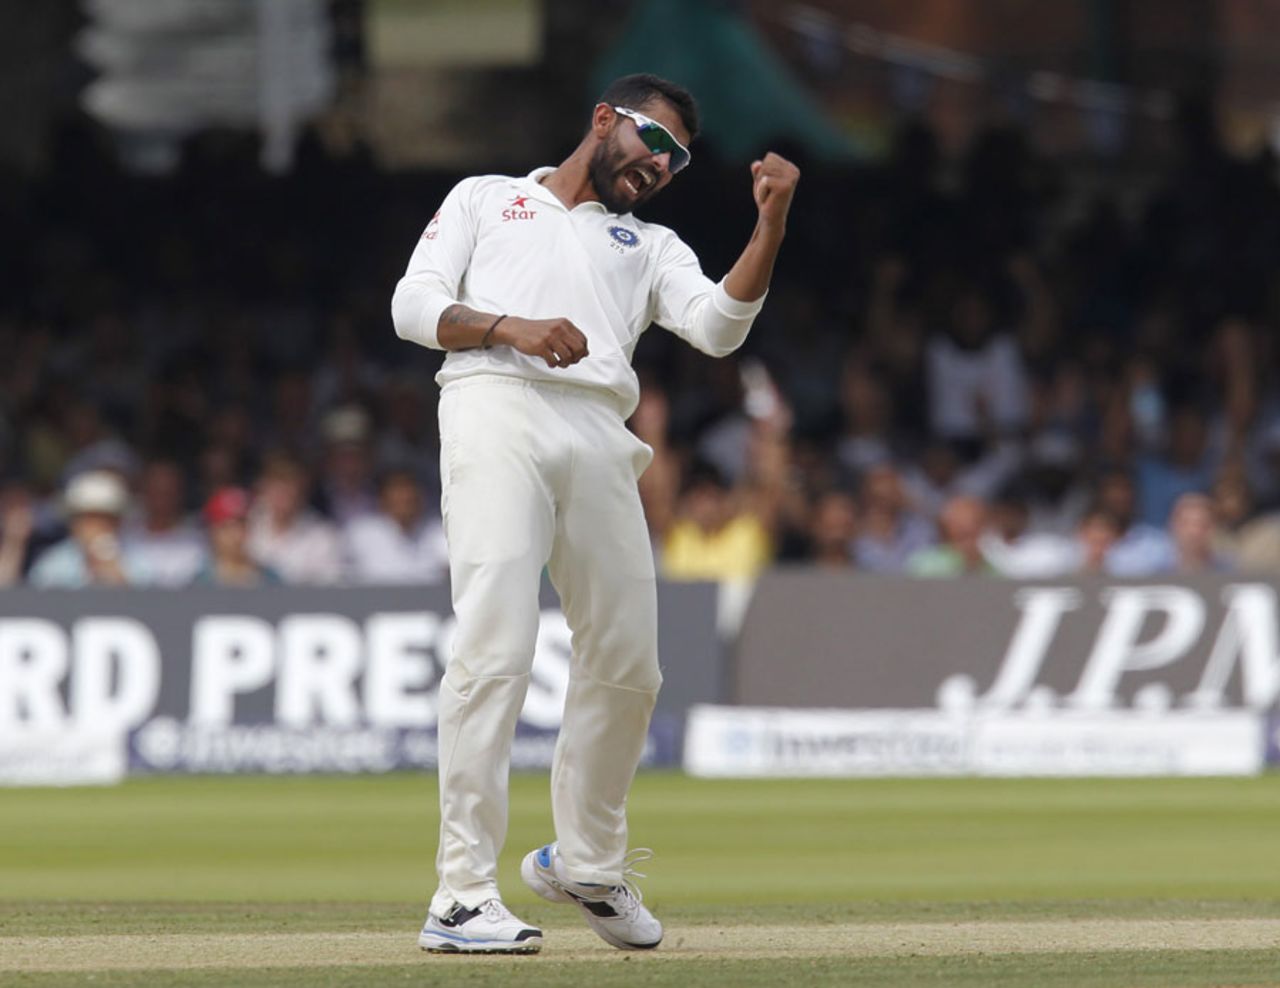 Ravindra Jadeja struck with his first ball, England v India, 2nd Investec Test, Lord's, 4th day, July 20, 2014